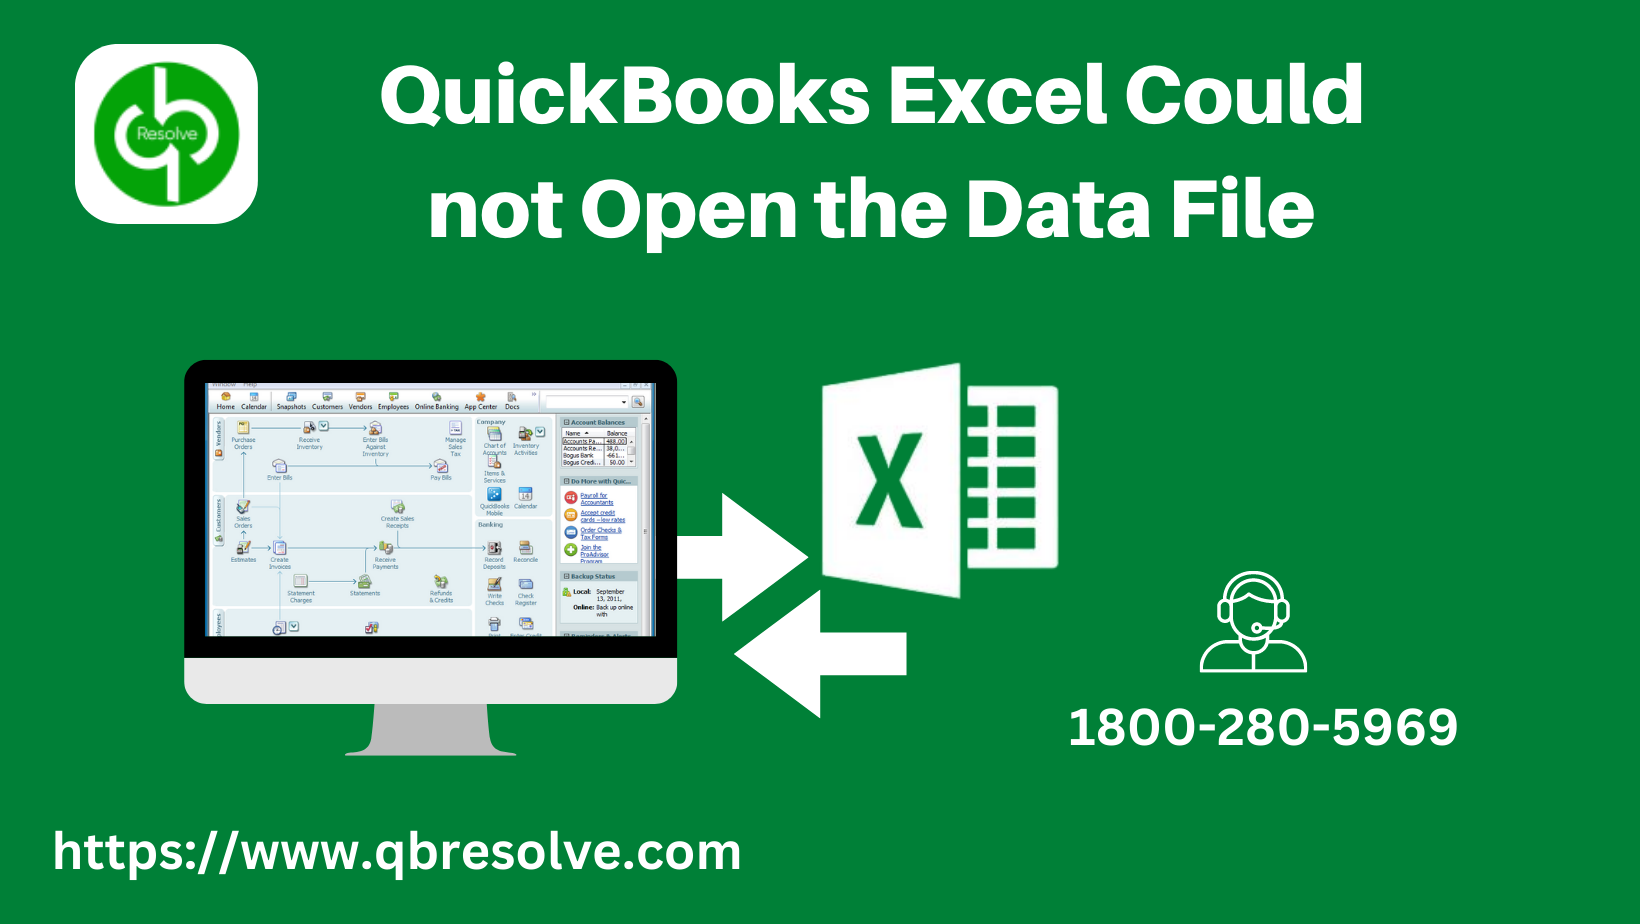 QuickBooks Excel Could not Open the Data File